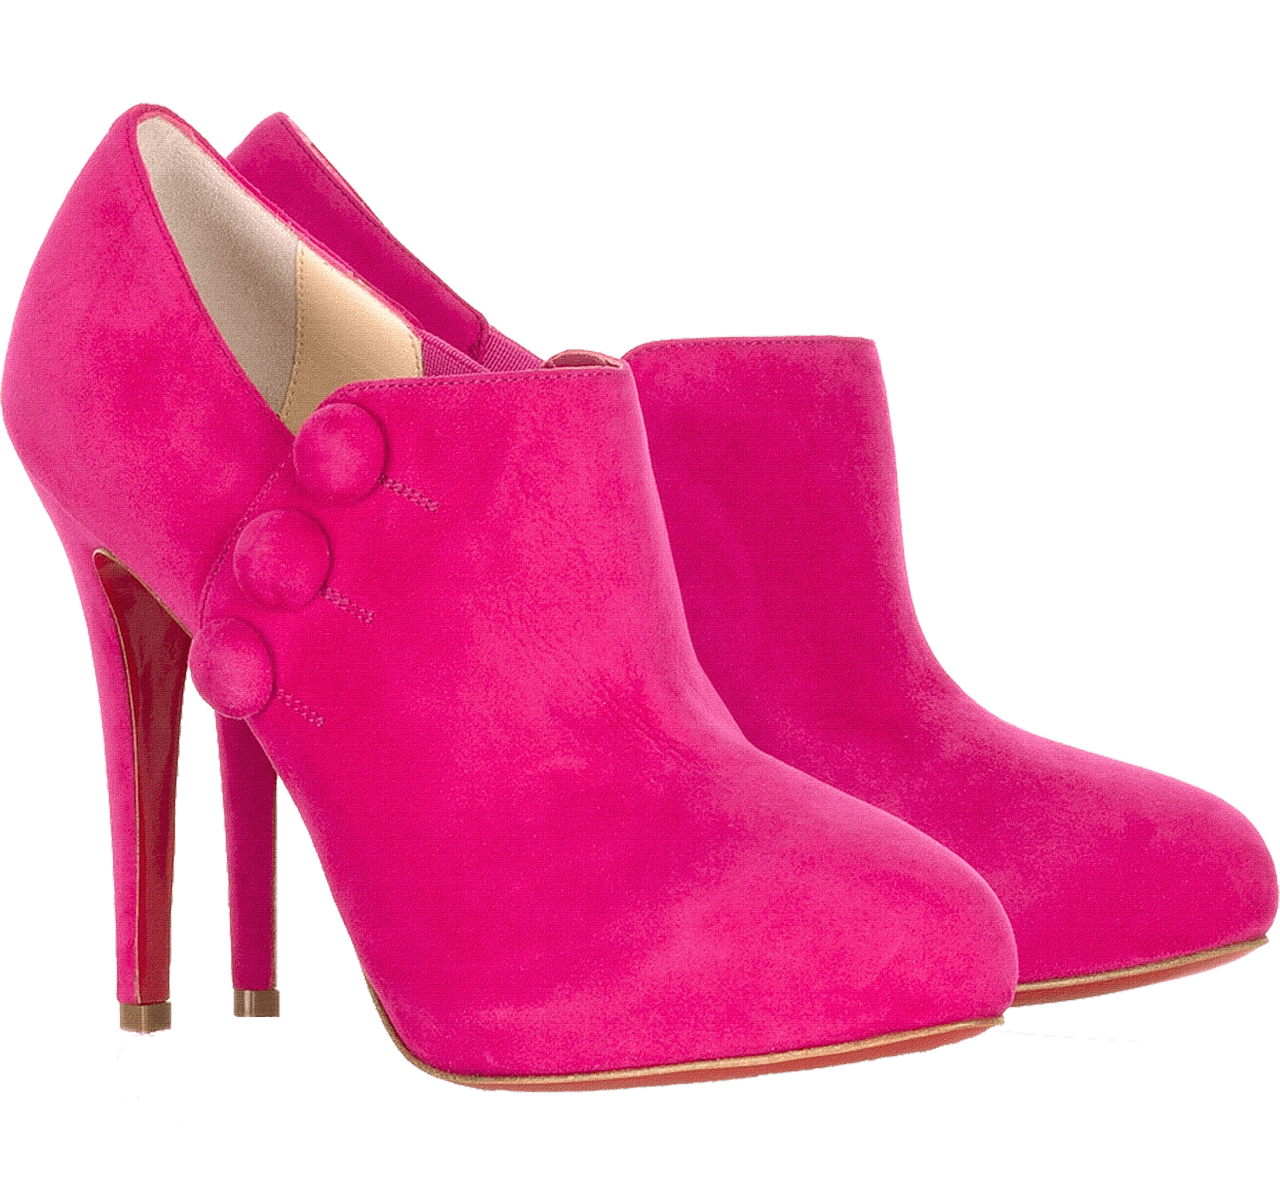 Pink Women Shoes Png Image Png Image - Women Shoes, Transparent background PNG HD thumbnail